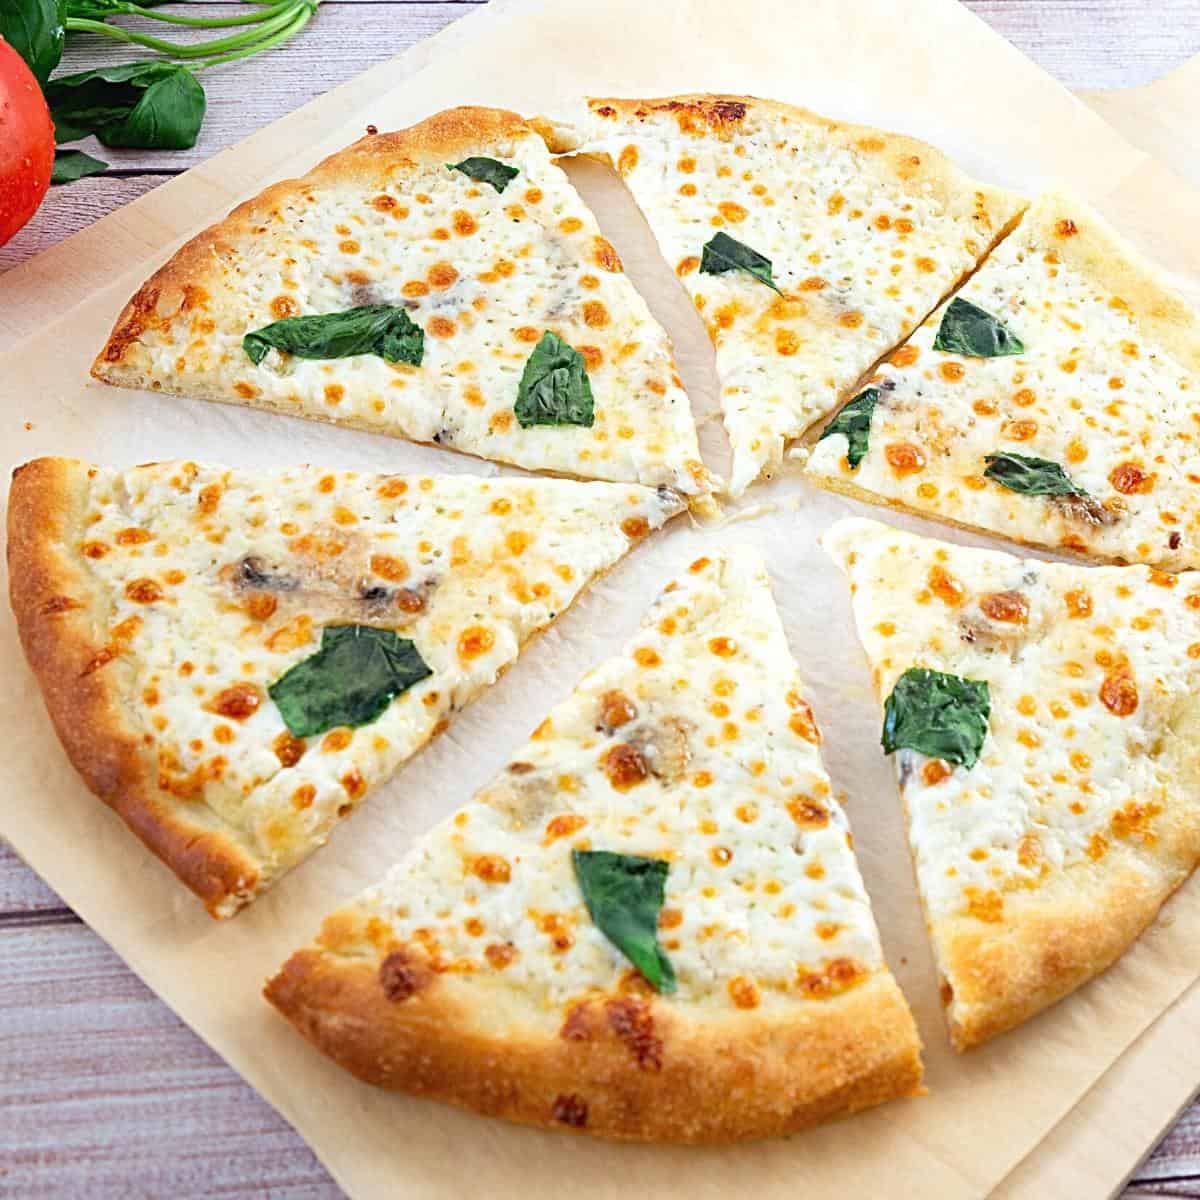 Frequently Asked Questions About Pizza Bianca